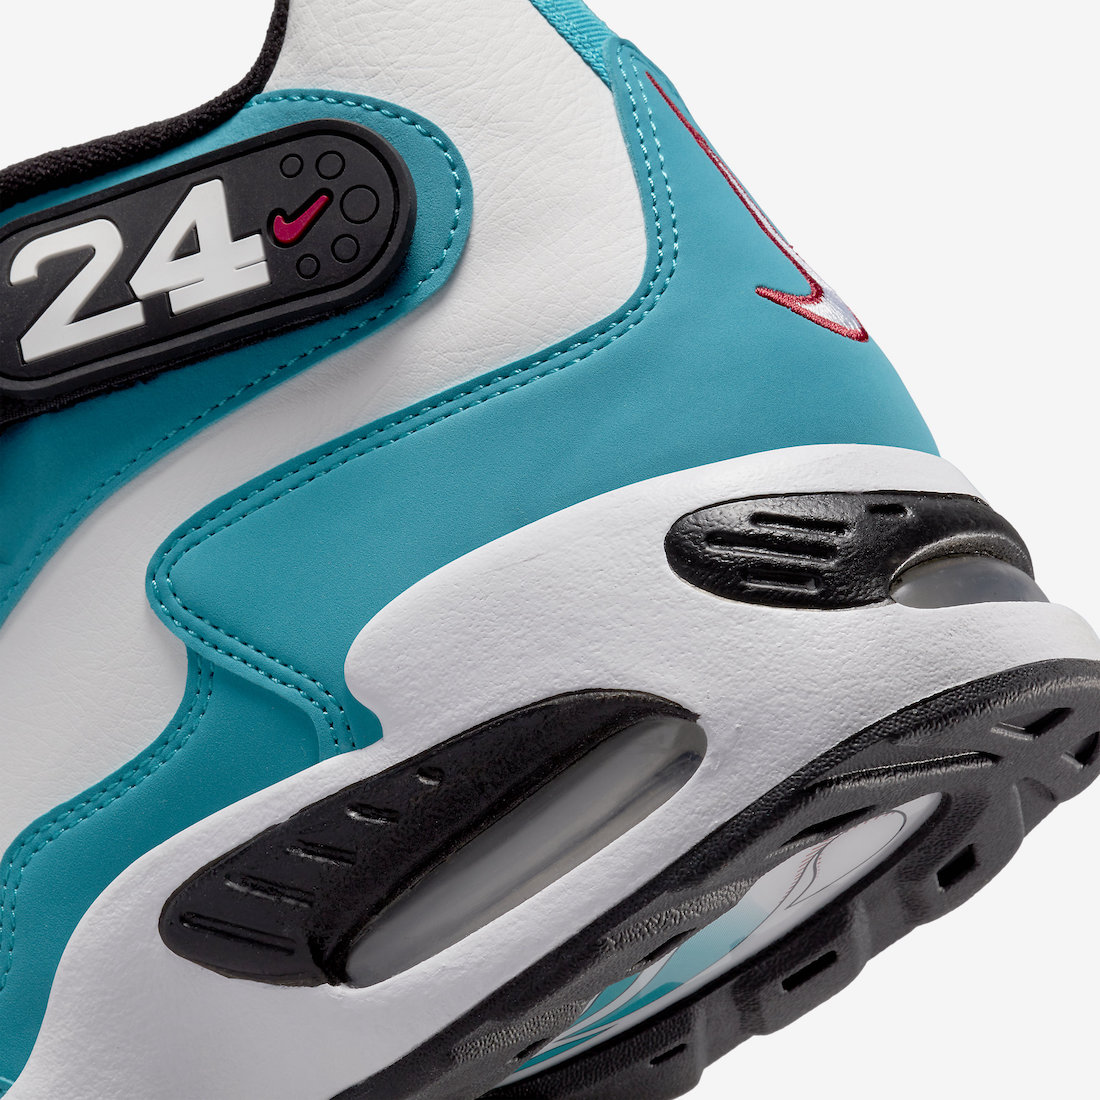 Nike Air Griffey Max 1 DQ8578-300 Release Date